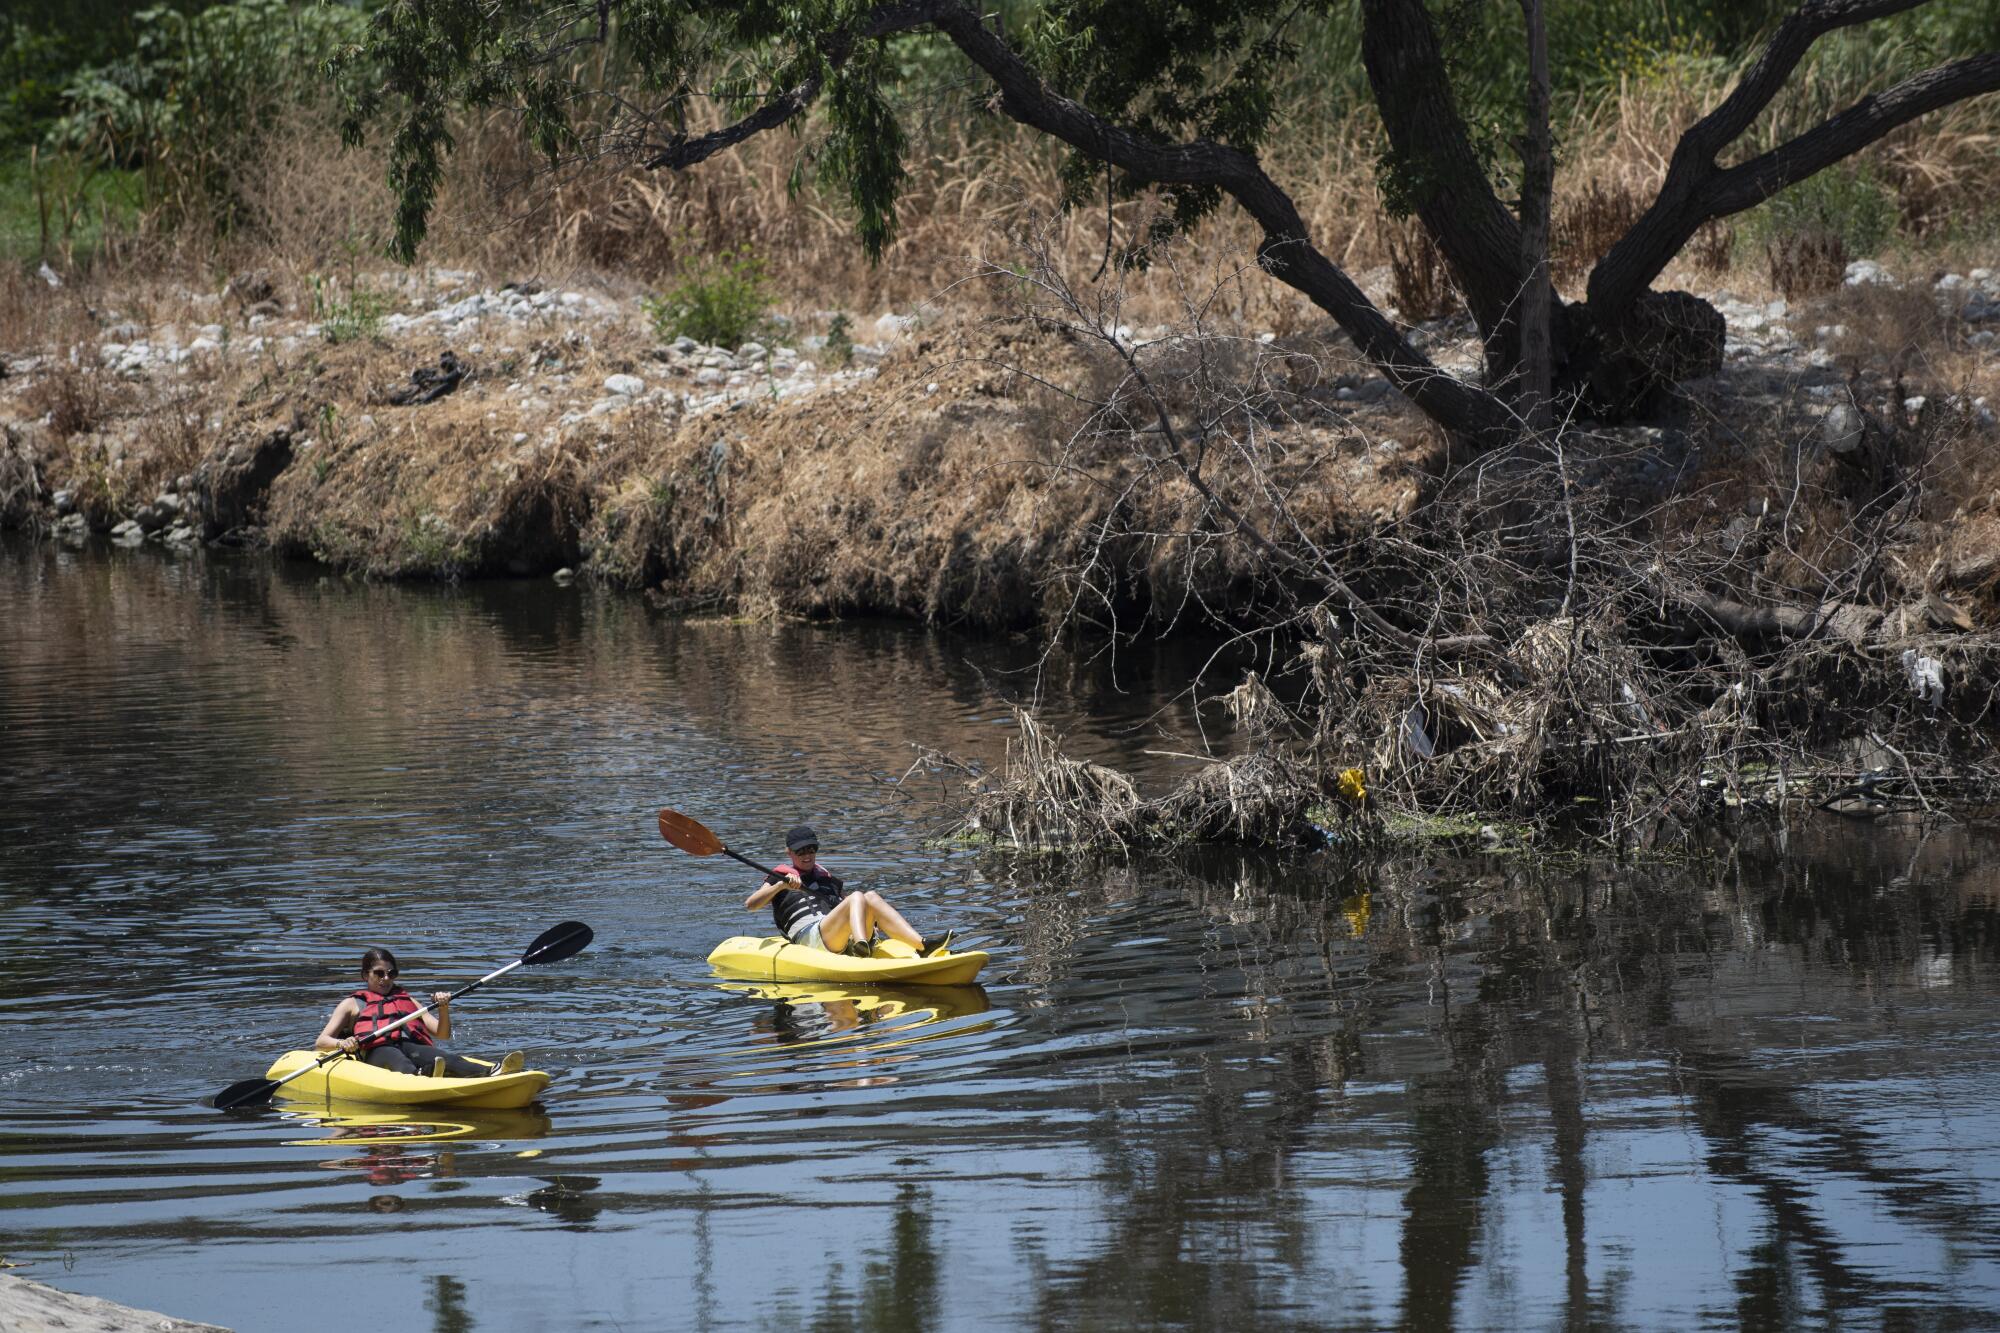 Kayakers float on the Los Angeles River in Elysian Park.